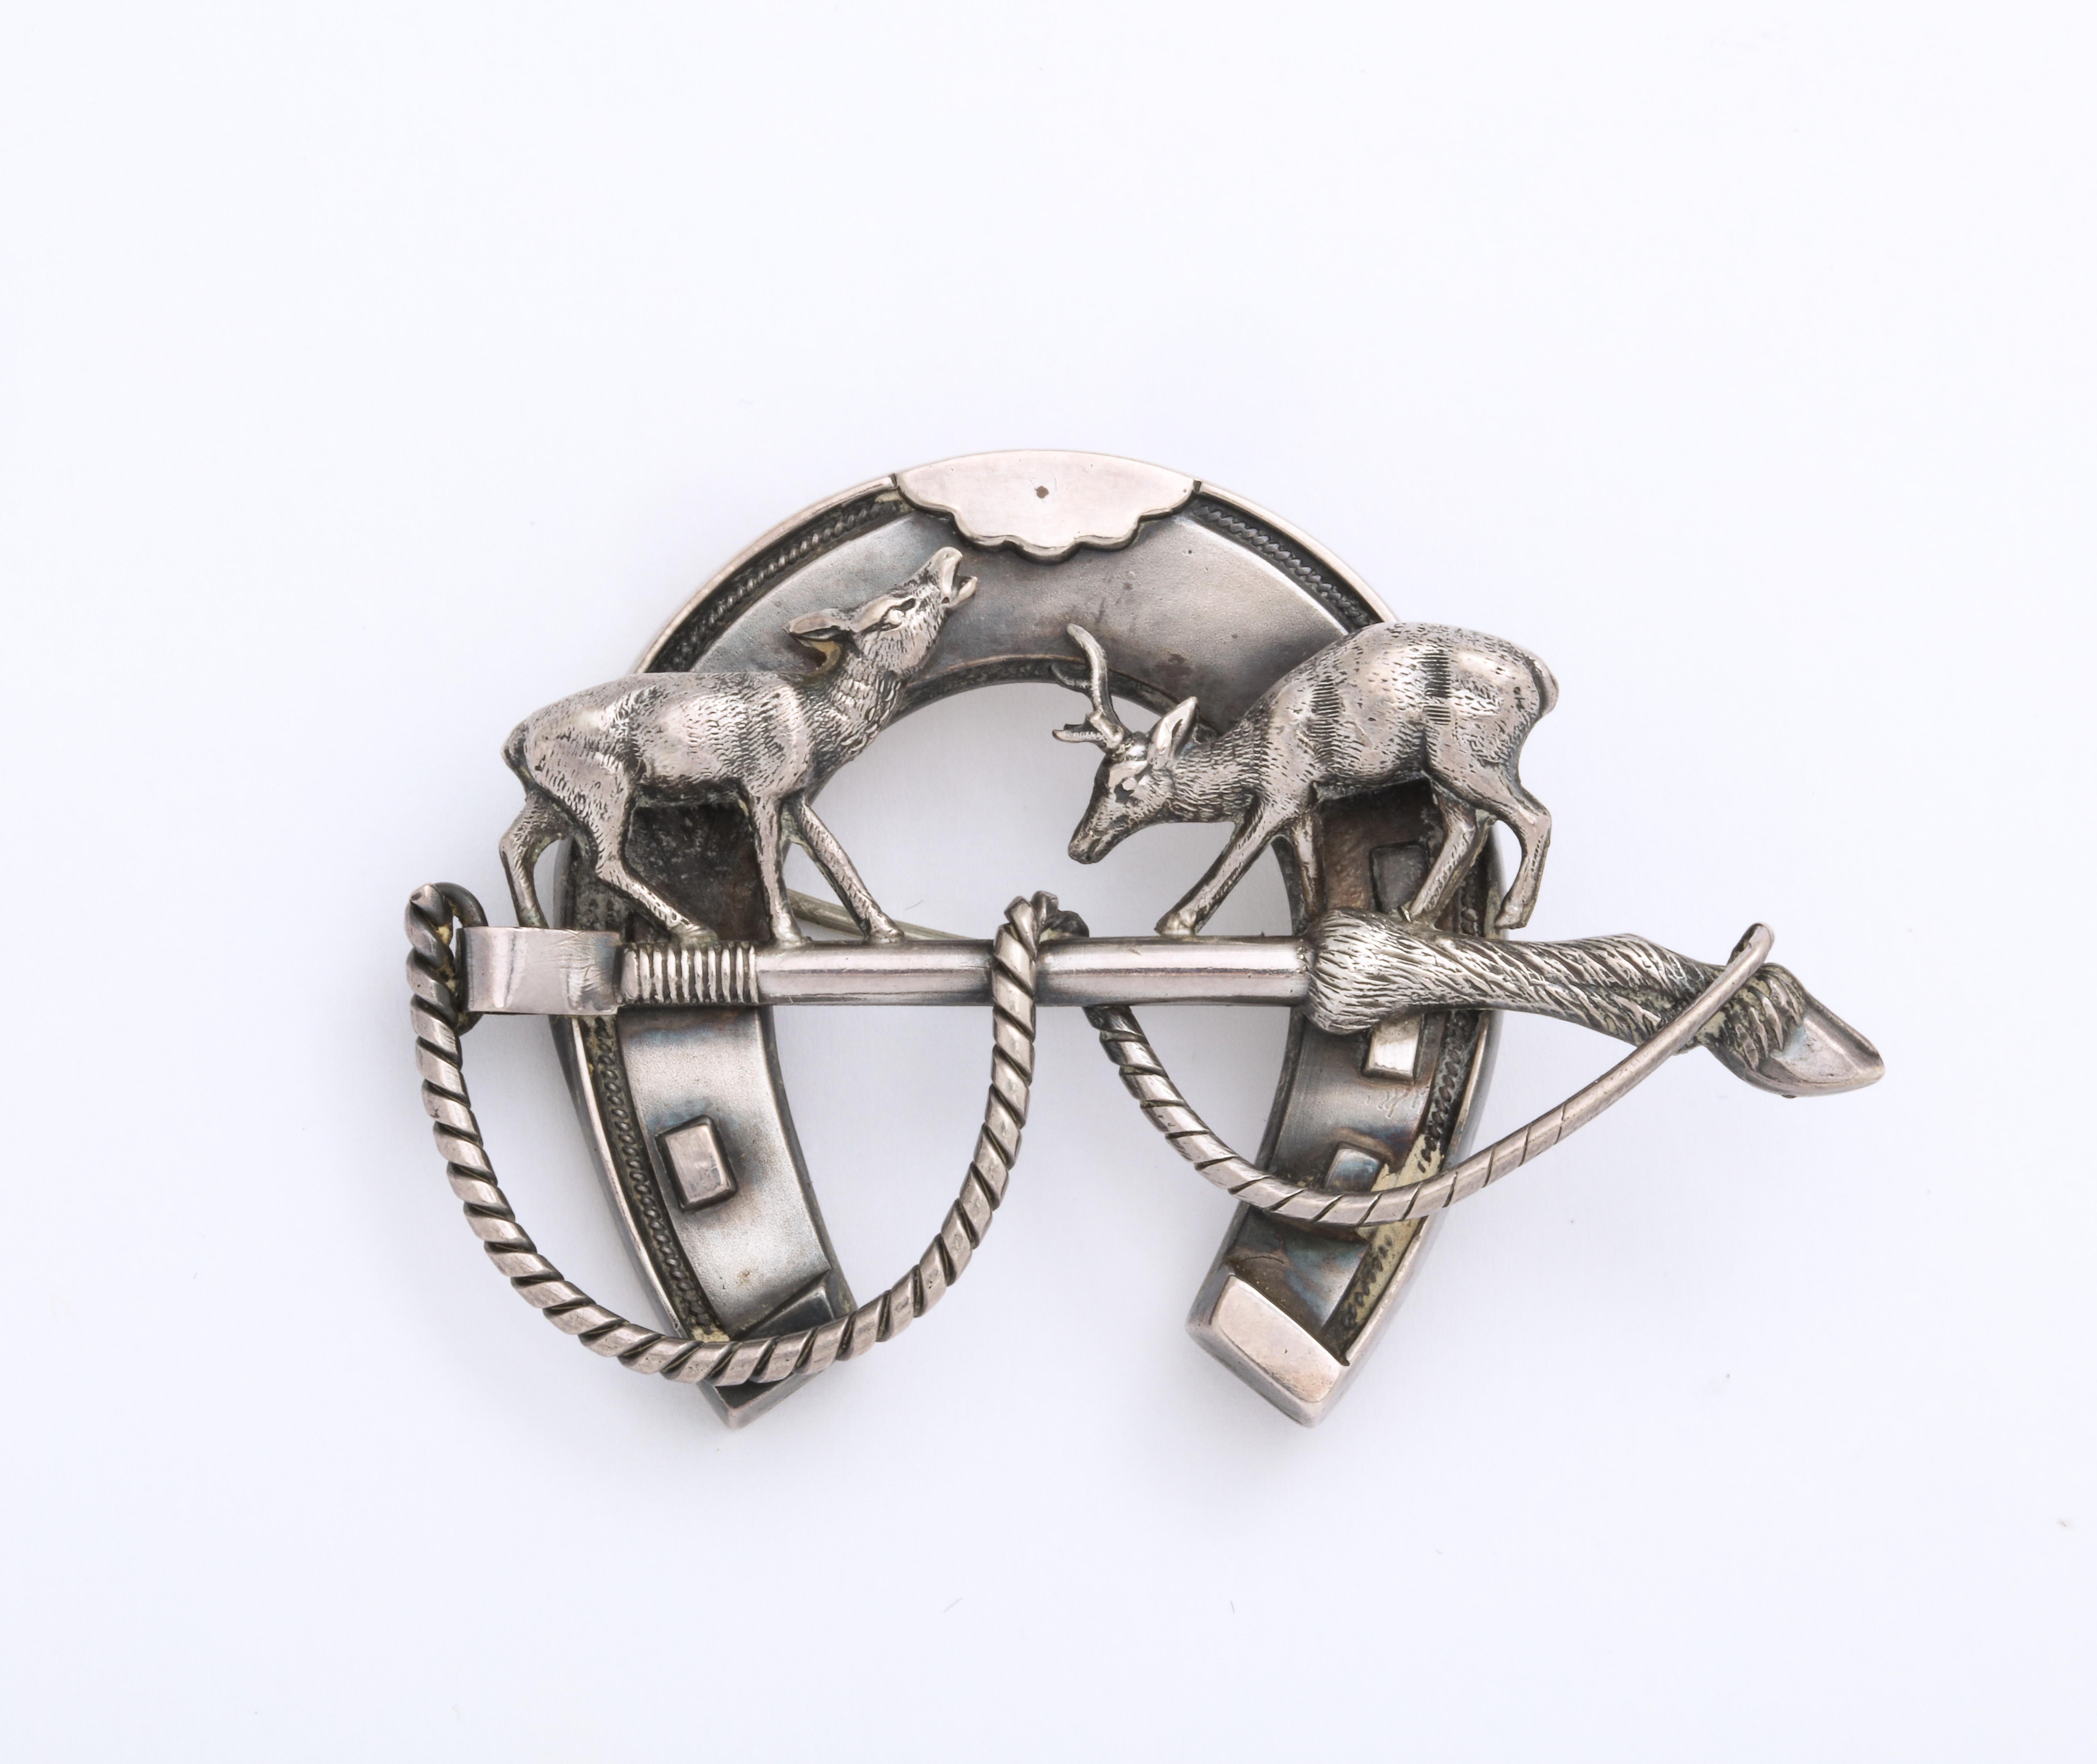 A Scottish Horseshoe brooch in sterling with two sculpted three dimensional deer on top of a deer leg riding crop, is an example of the hunting jewelry in the Victorian era. While the Victorians were nature oriented at this time that did not keep